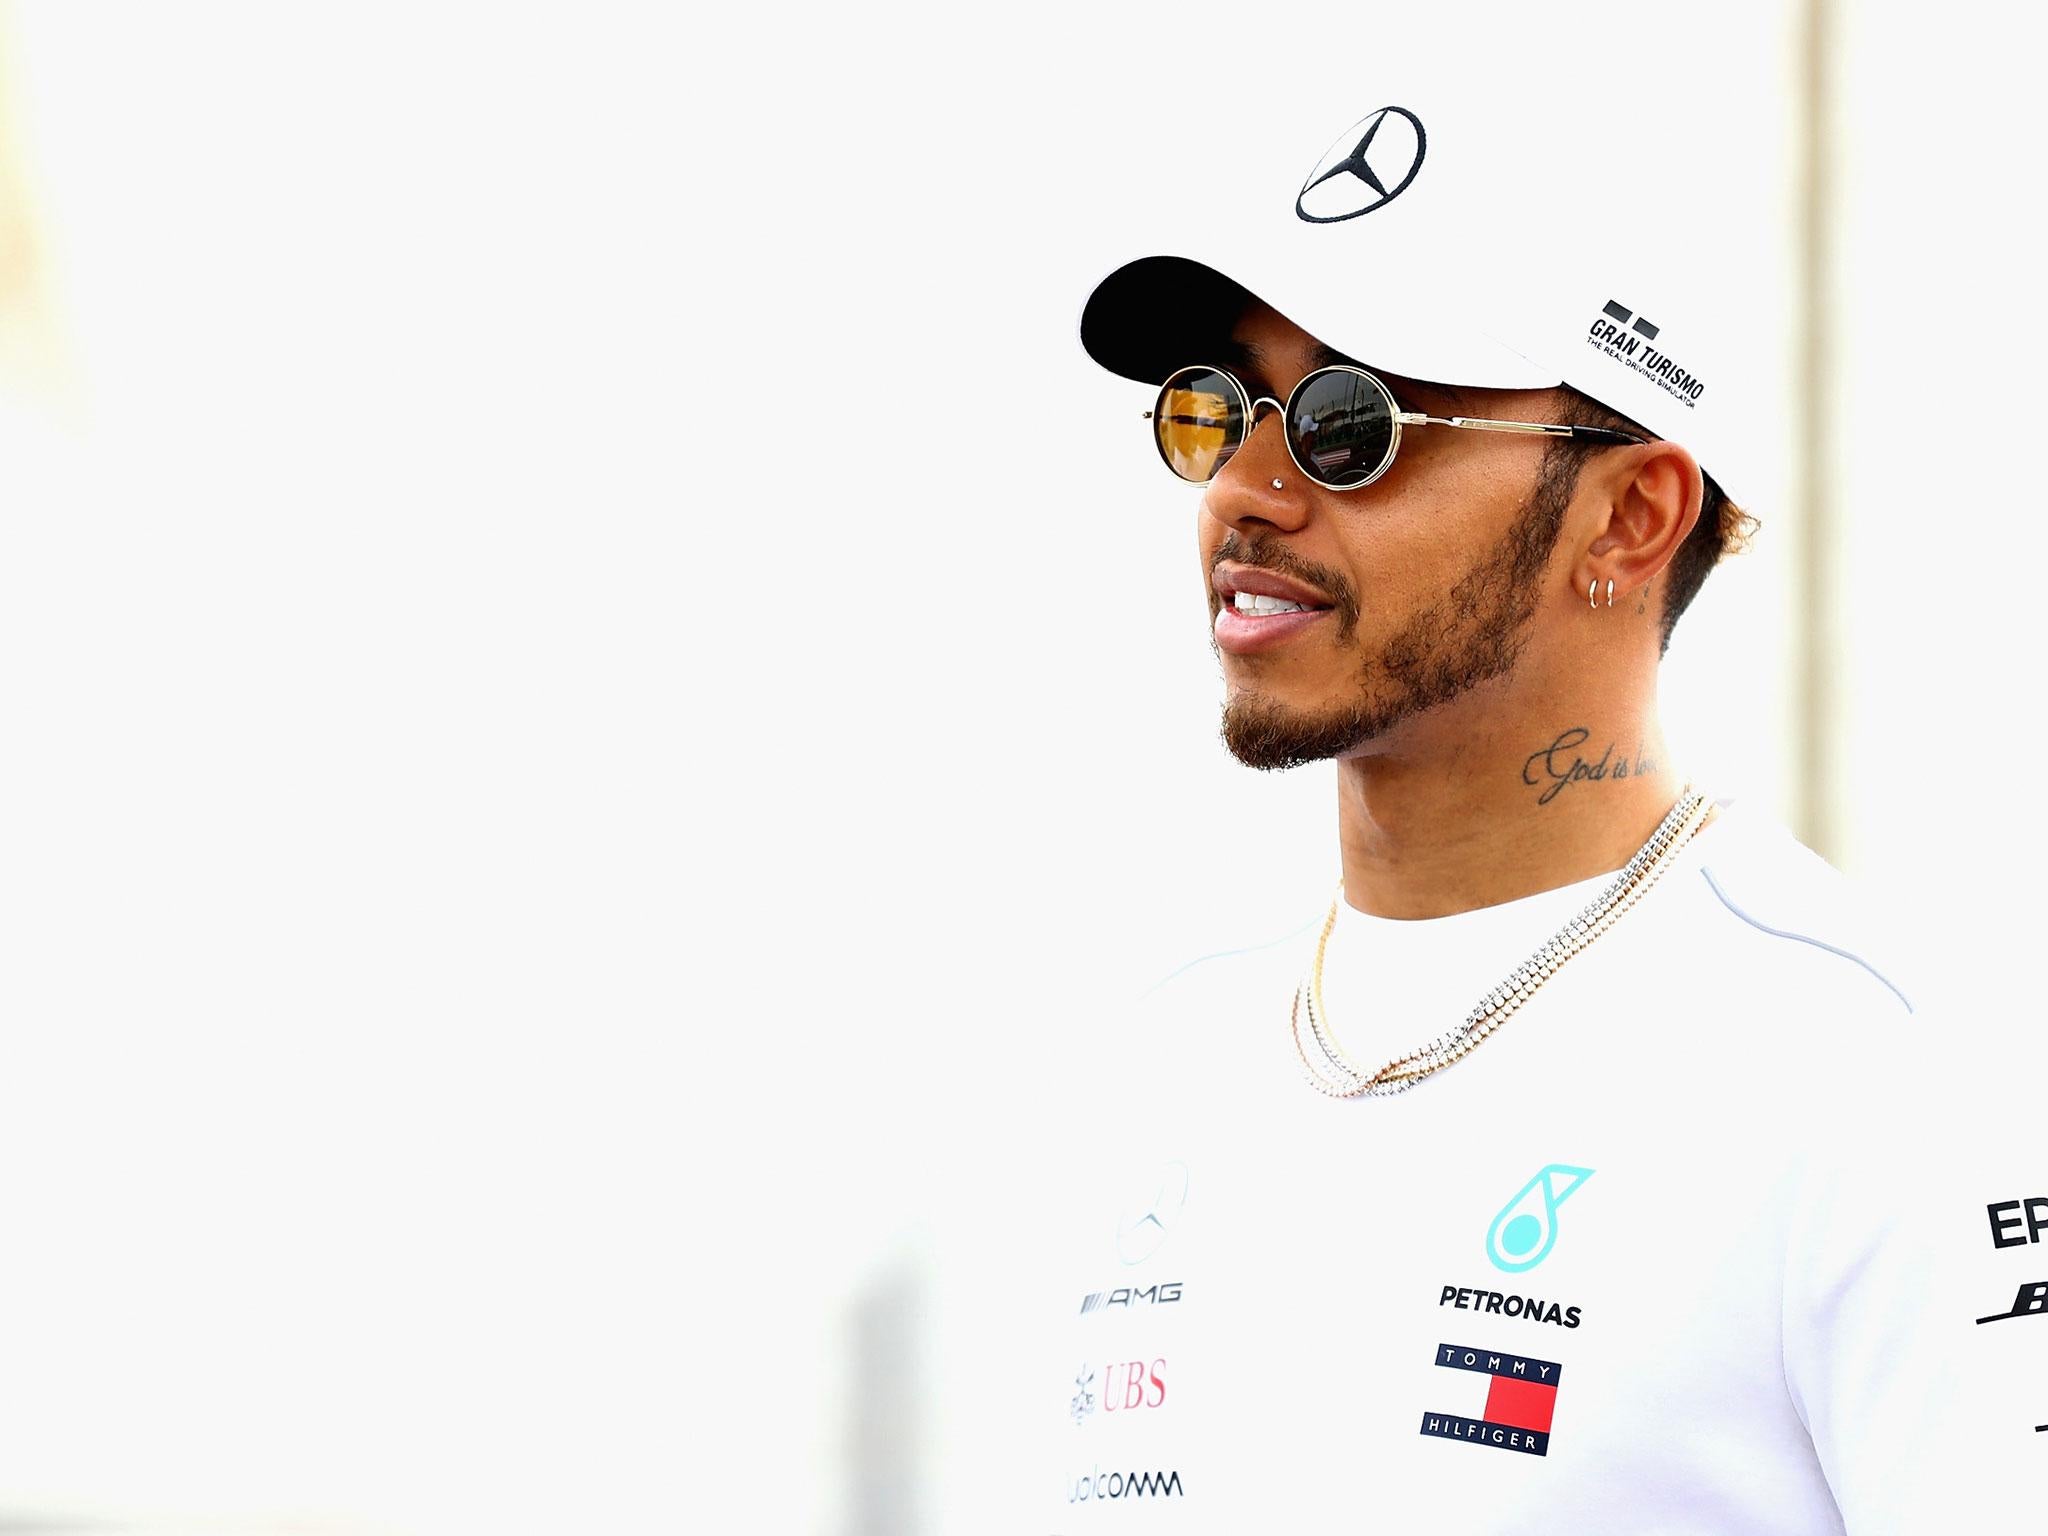 Lewis Hamilton said there is no rush to sort a new contract with Mercedes